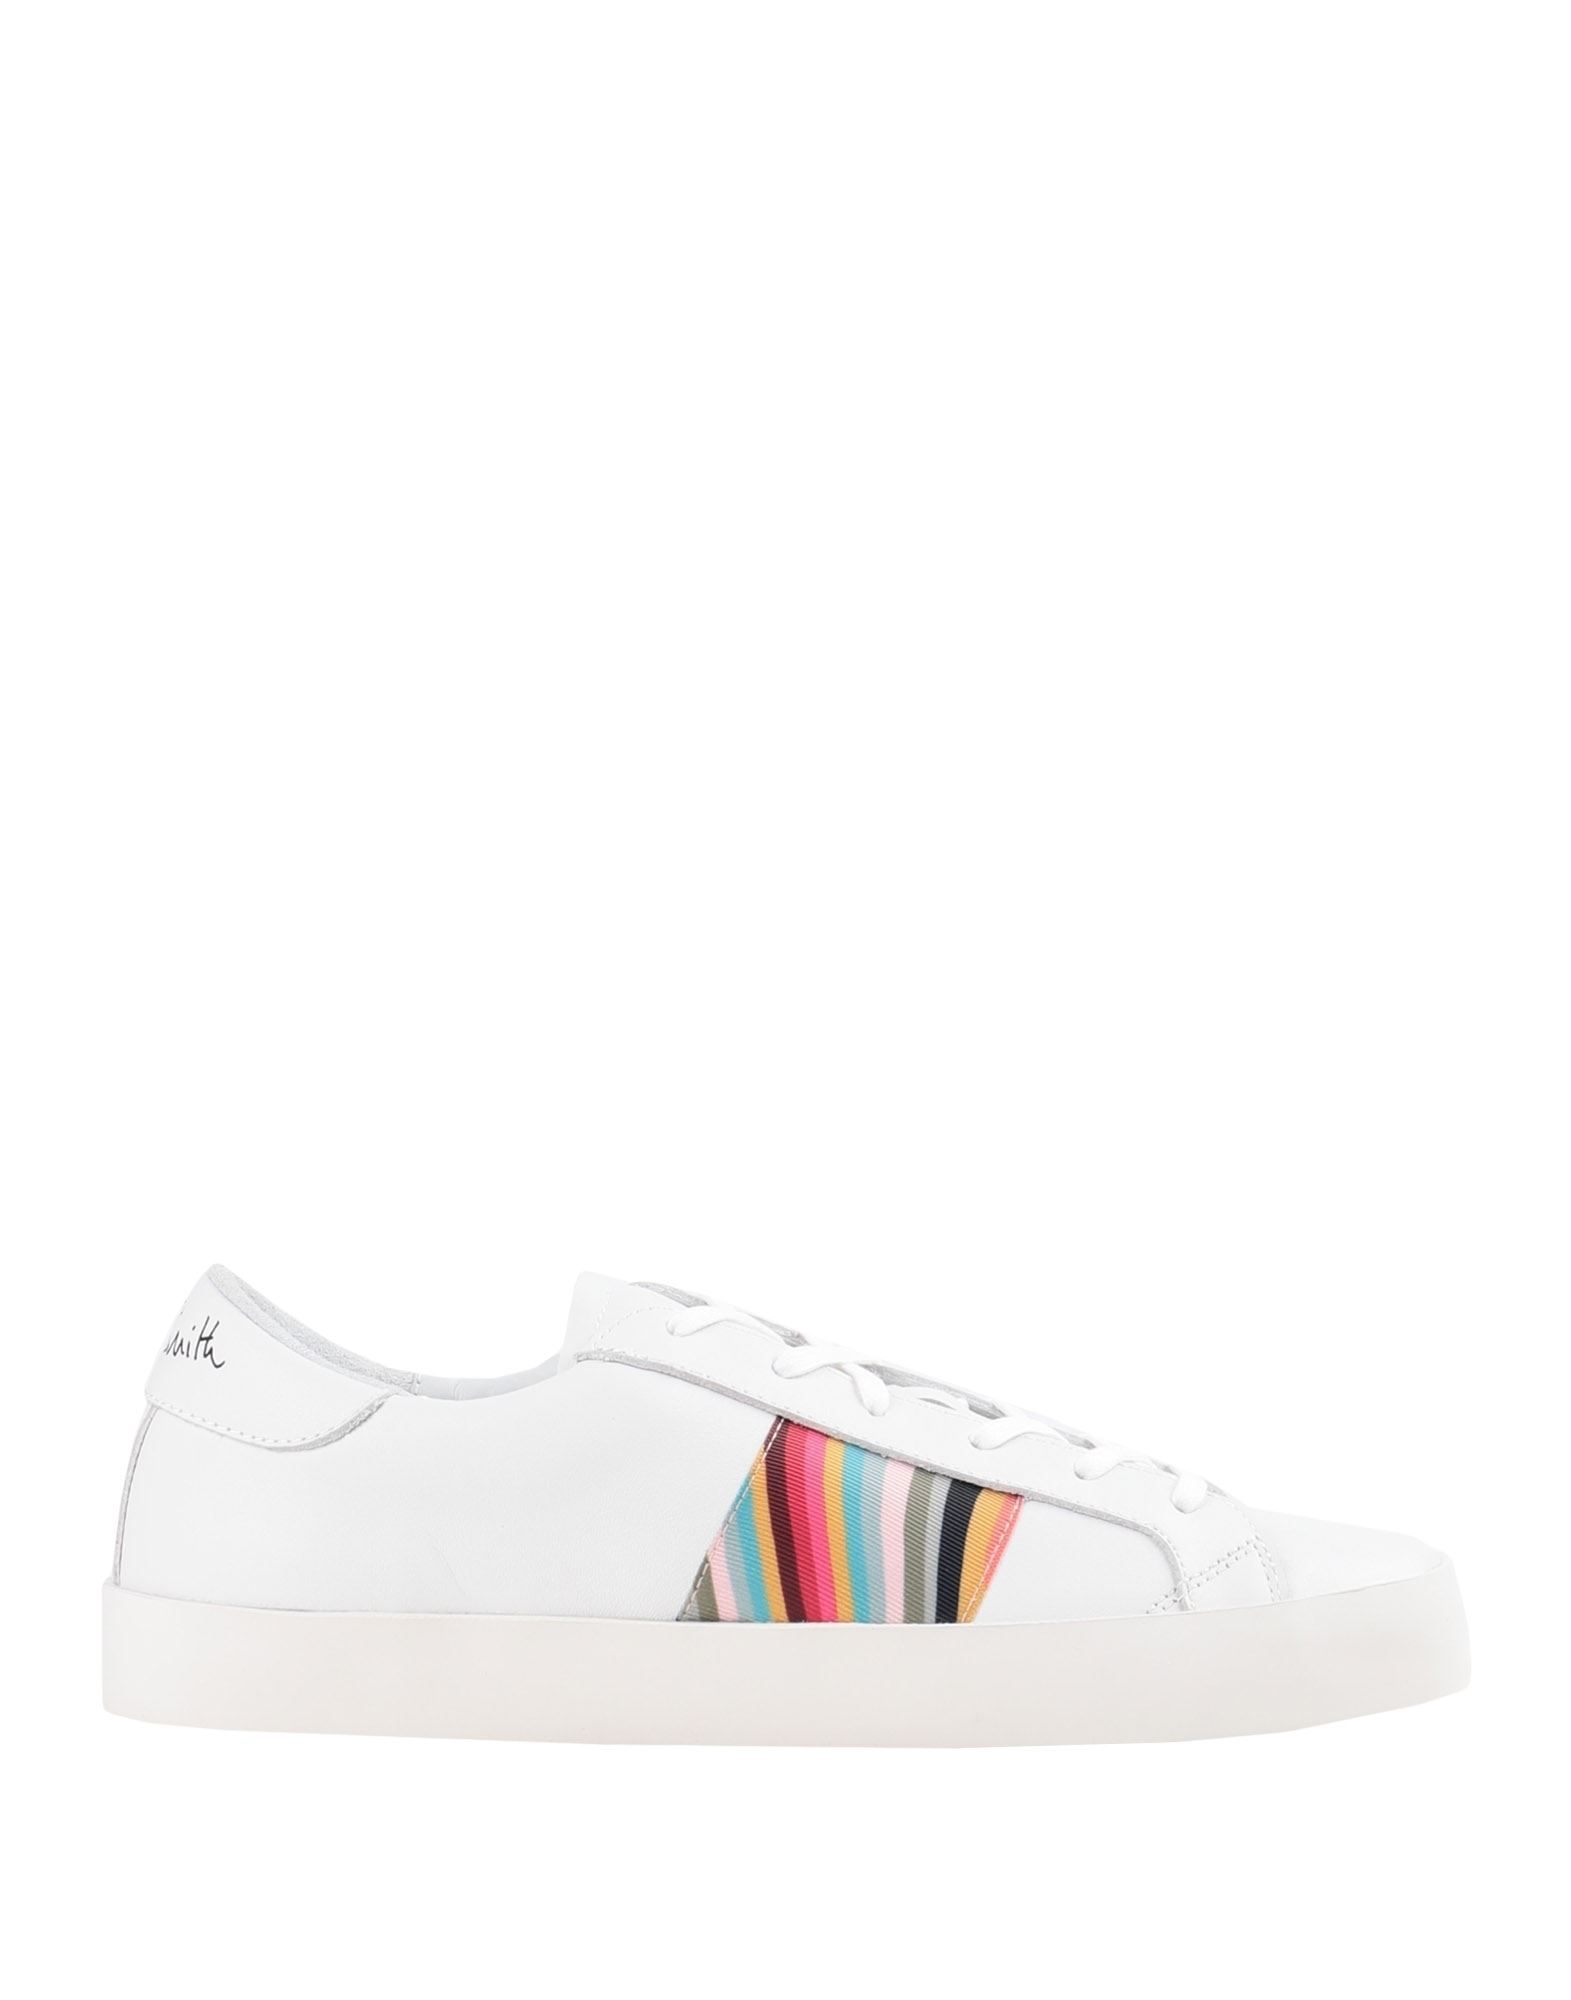 Paul Smith SNEAKERS